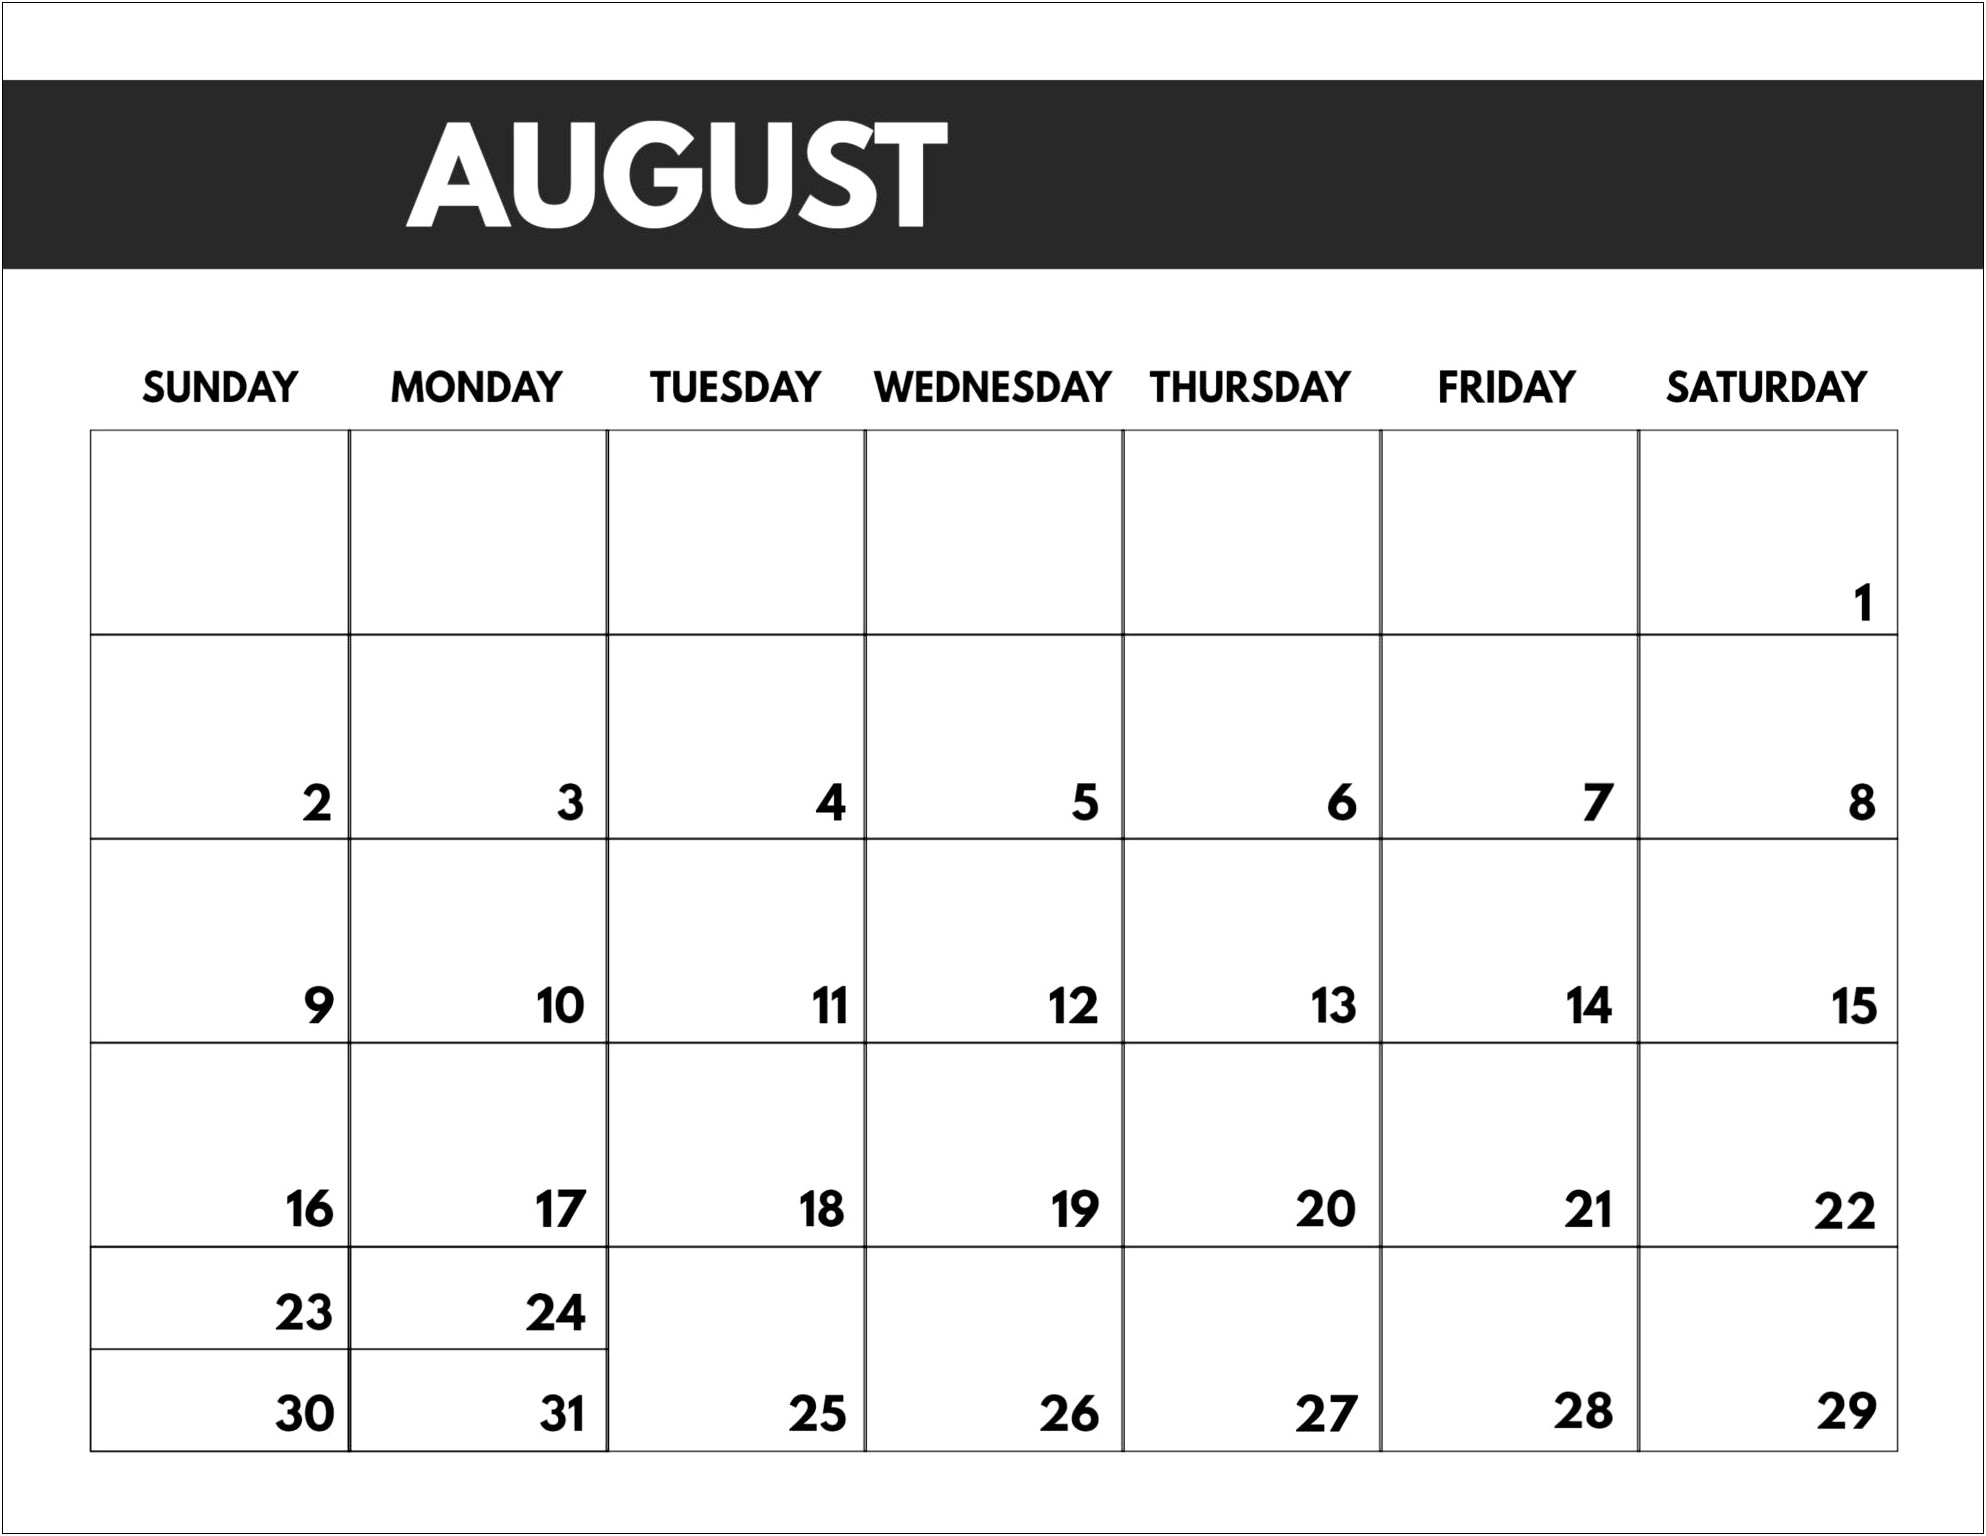 Free Printable Monthly Calendar Template 2020